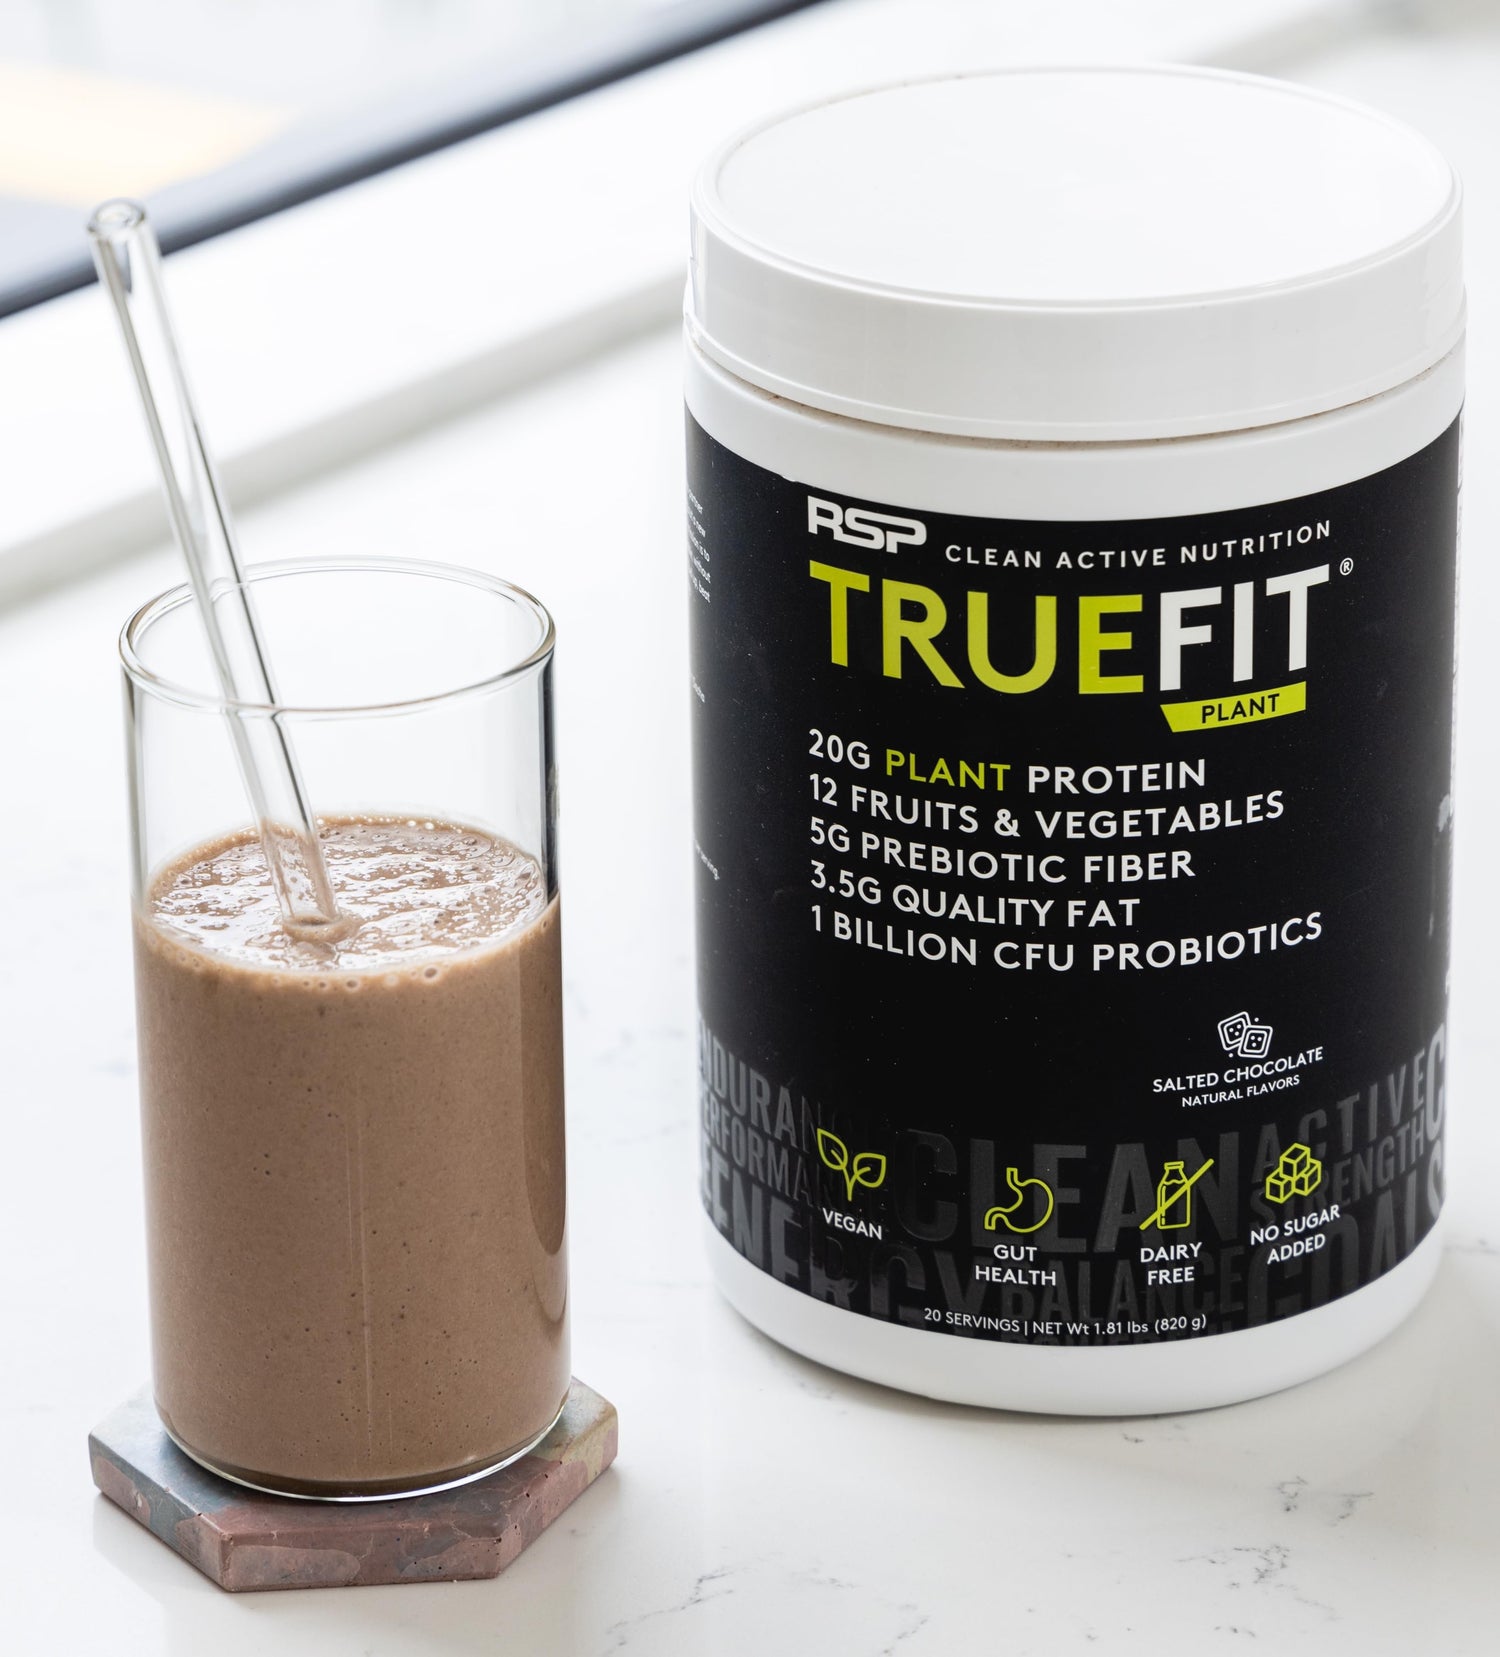 A TrueFit meal replacement shake next to a container of Salted Chocolate TrueFit Plant